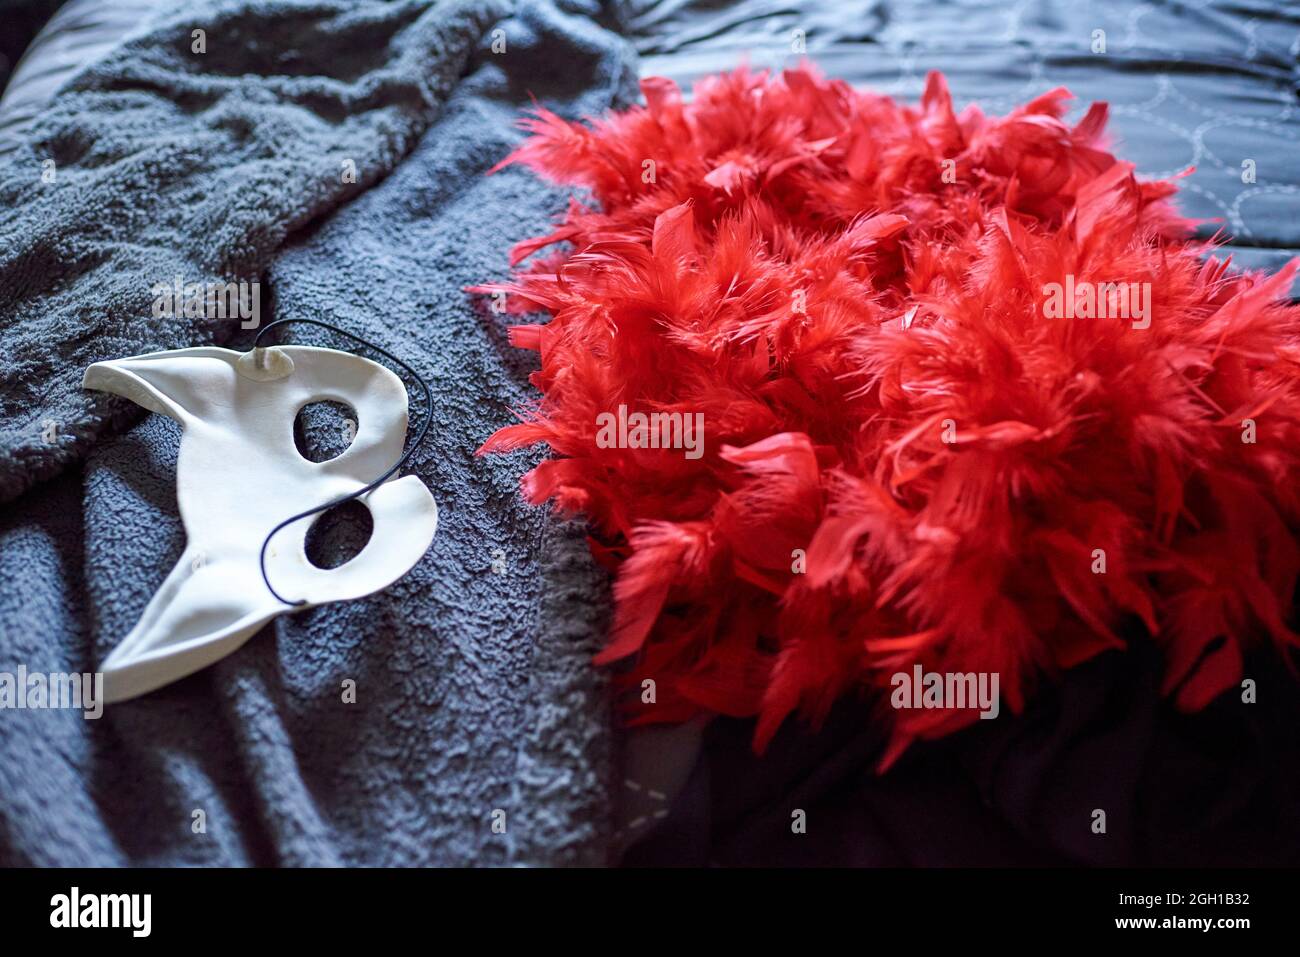 The white inside of an upside down mask and a red feather boa lie on a blue grey comforter on a bed. Stock Photo